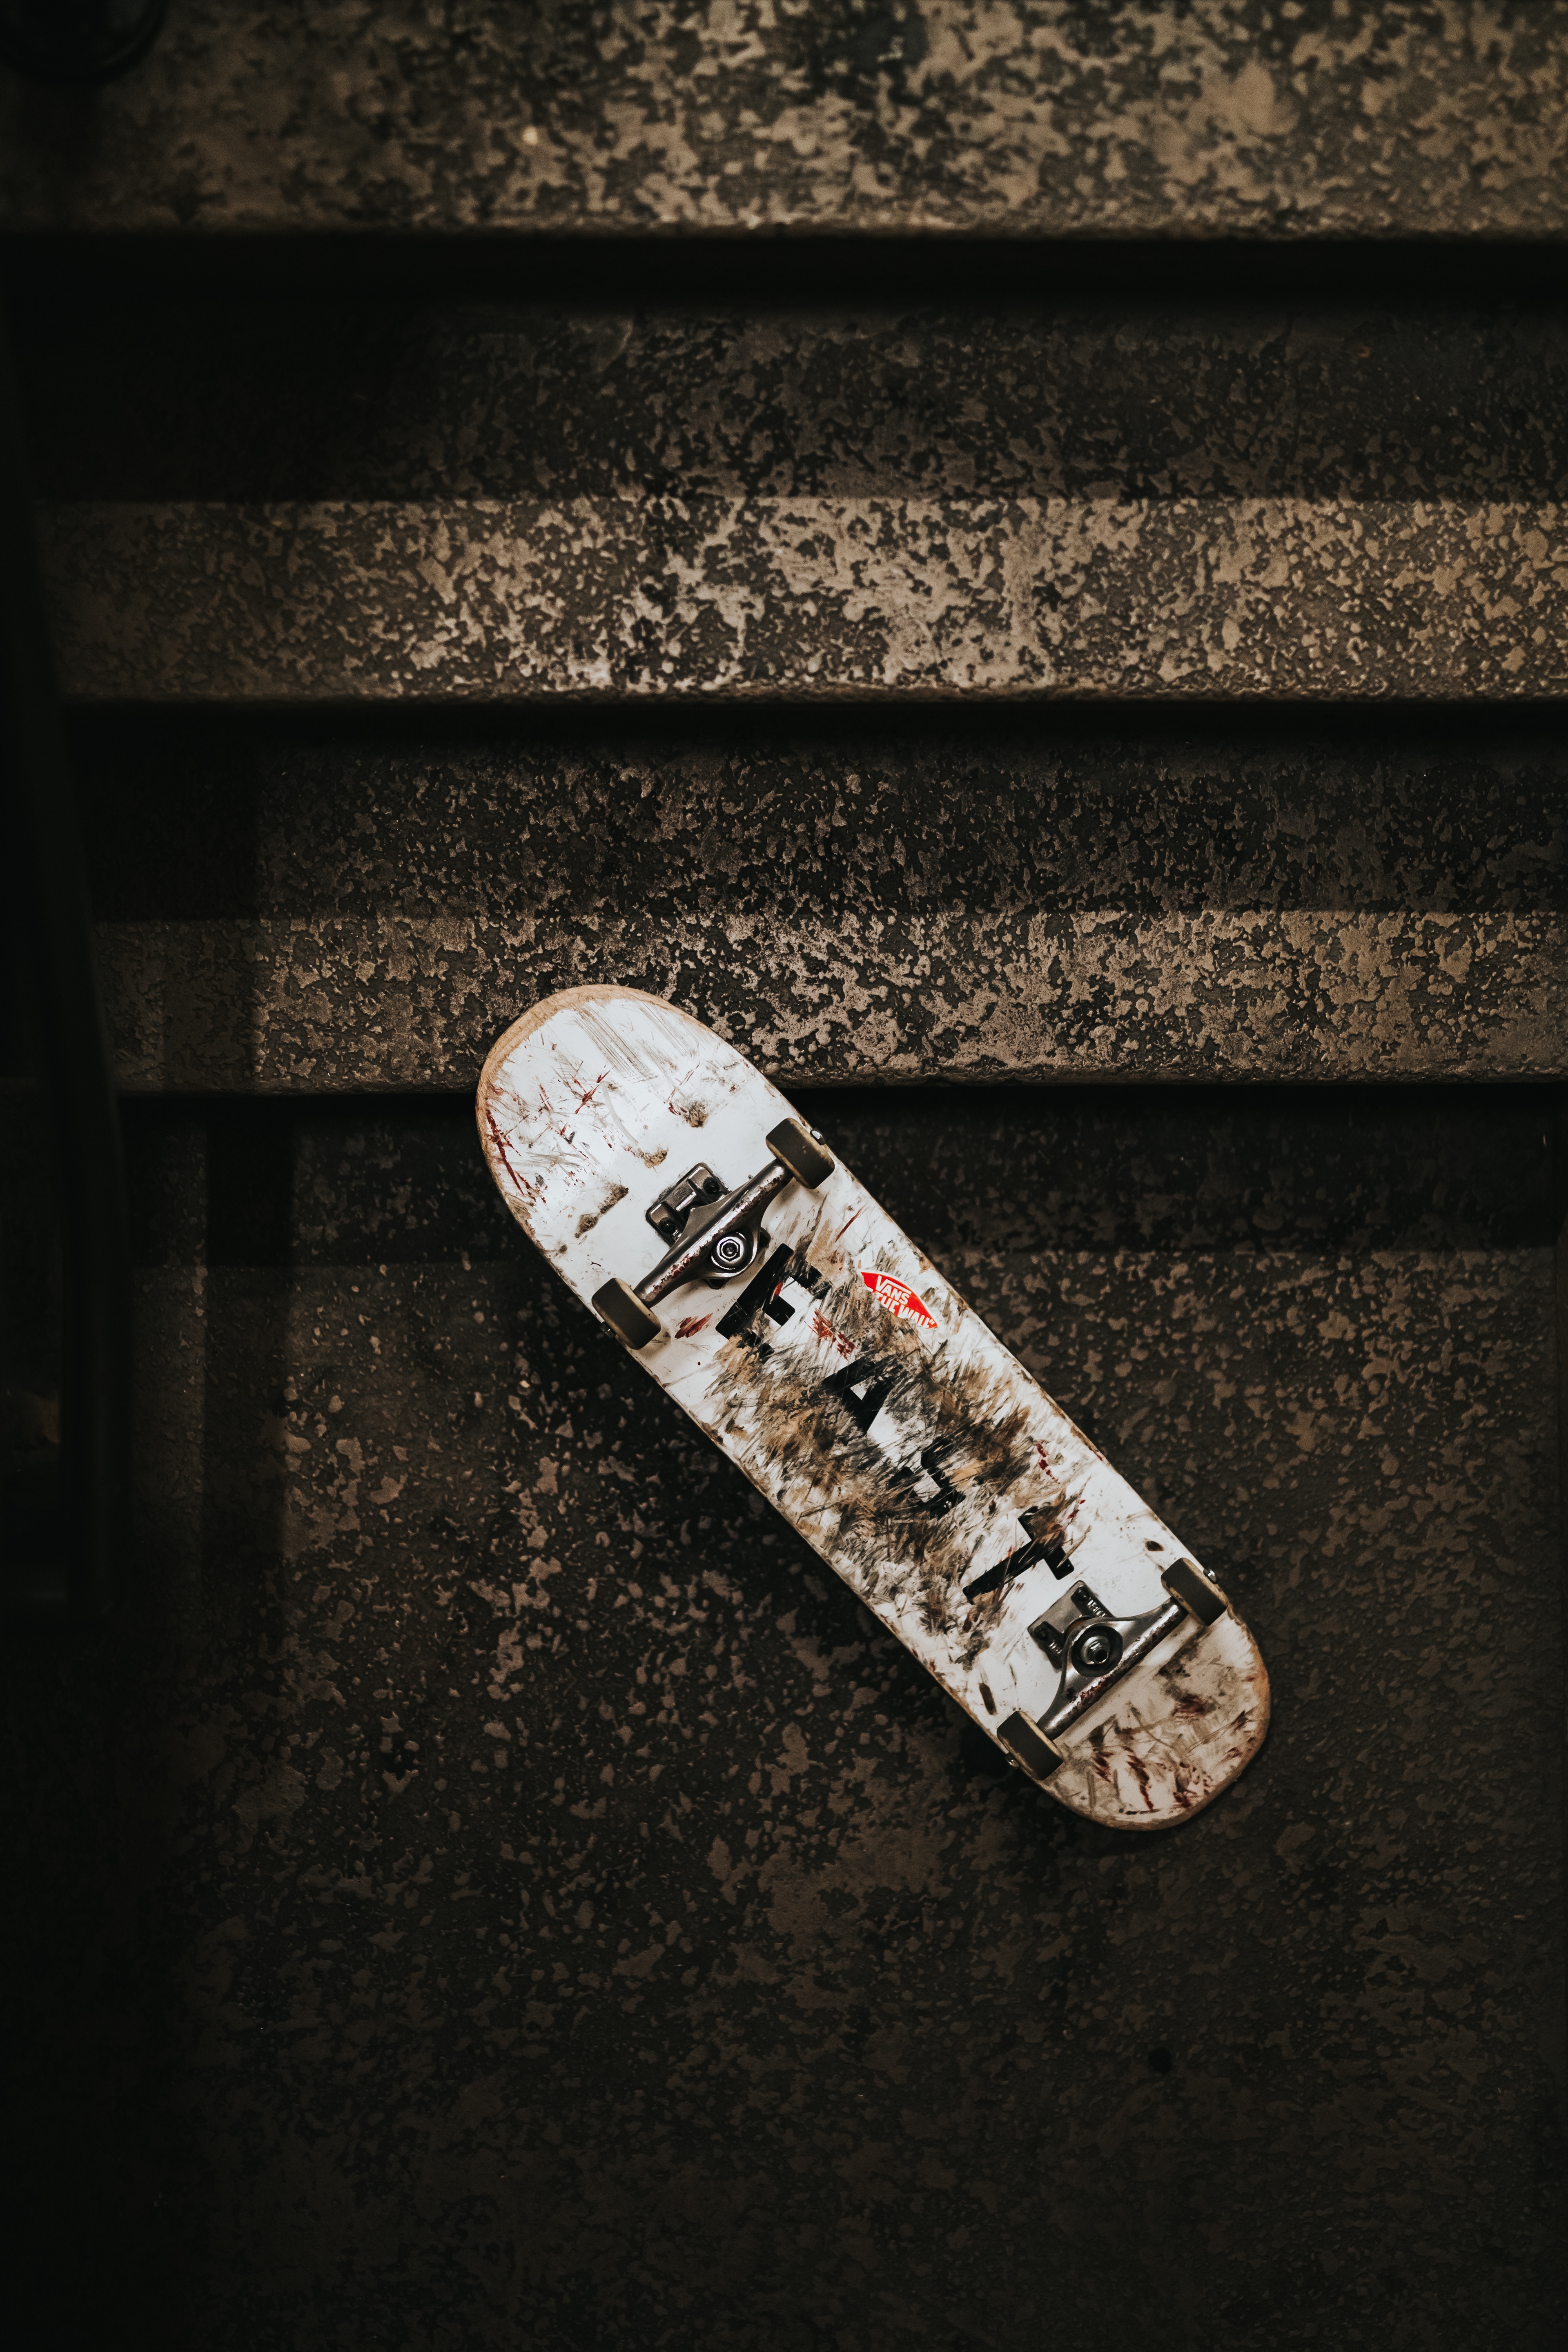 sports, lost, stairs, ladder, shabby, skateboard, wheels, dirty